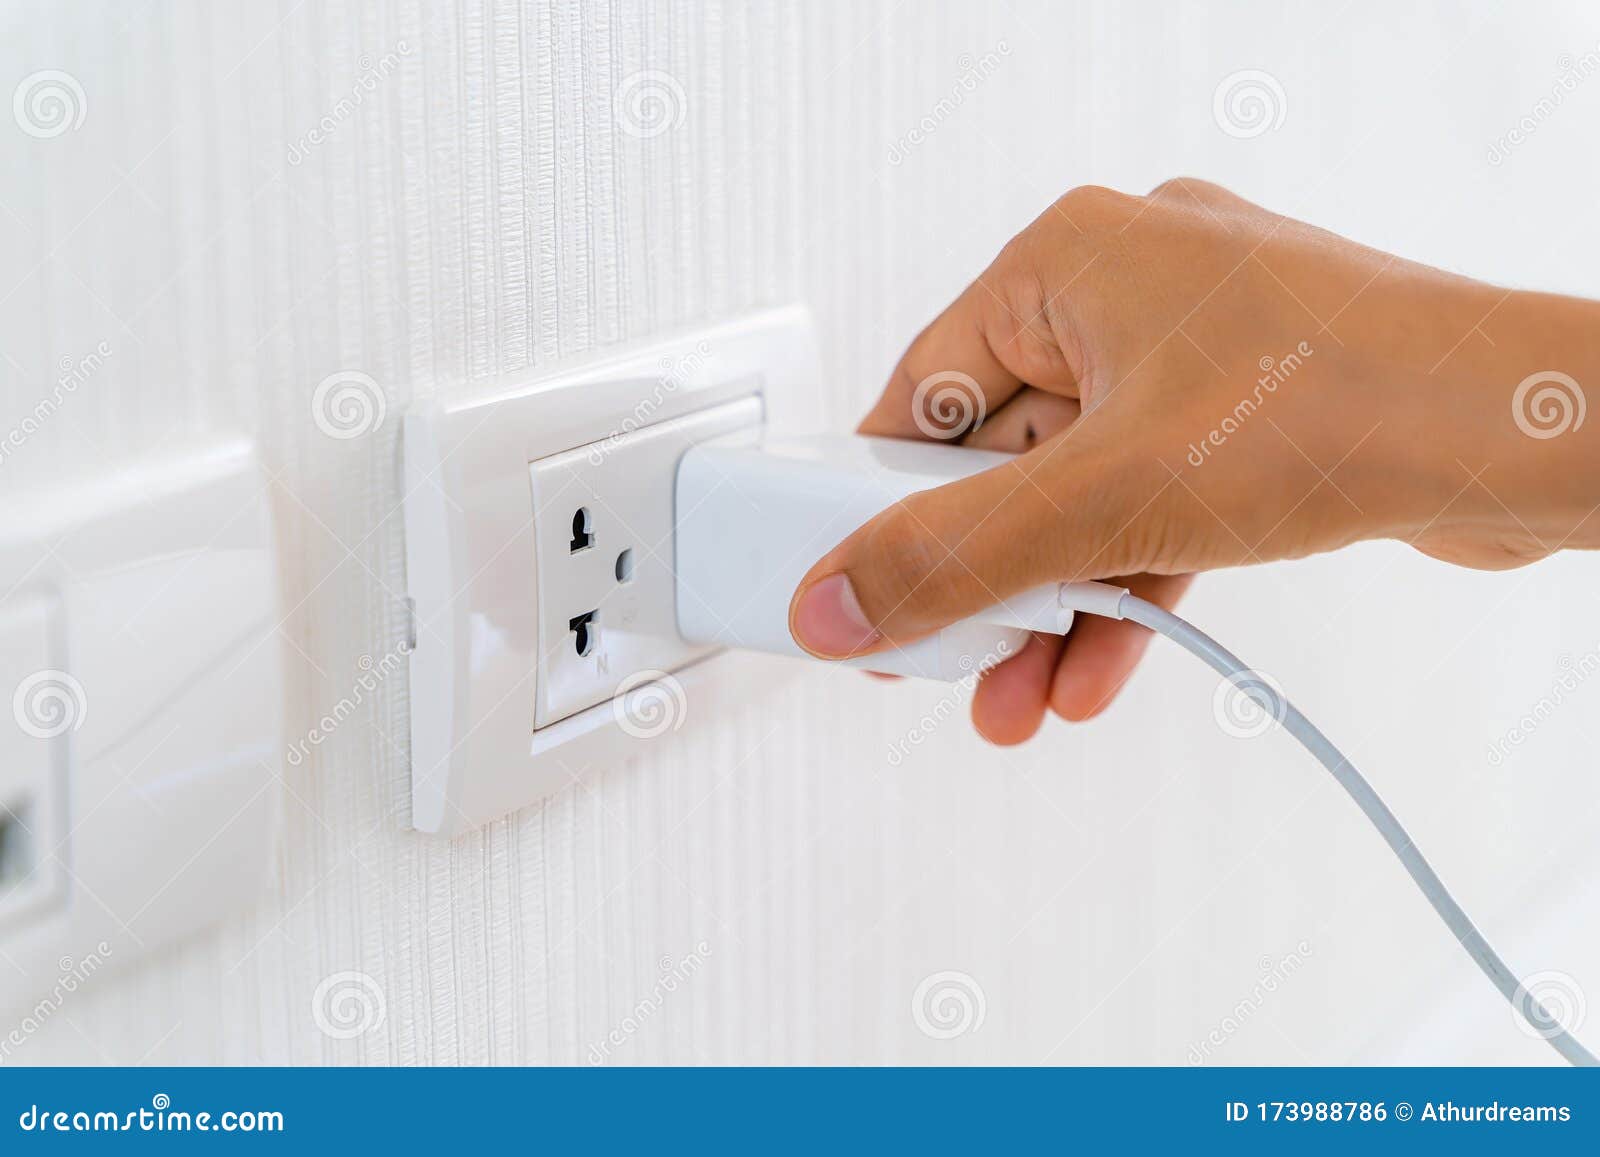 woman`s hand inserting electrical power cord plug into receptacle on wall outlet